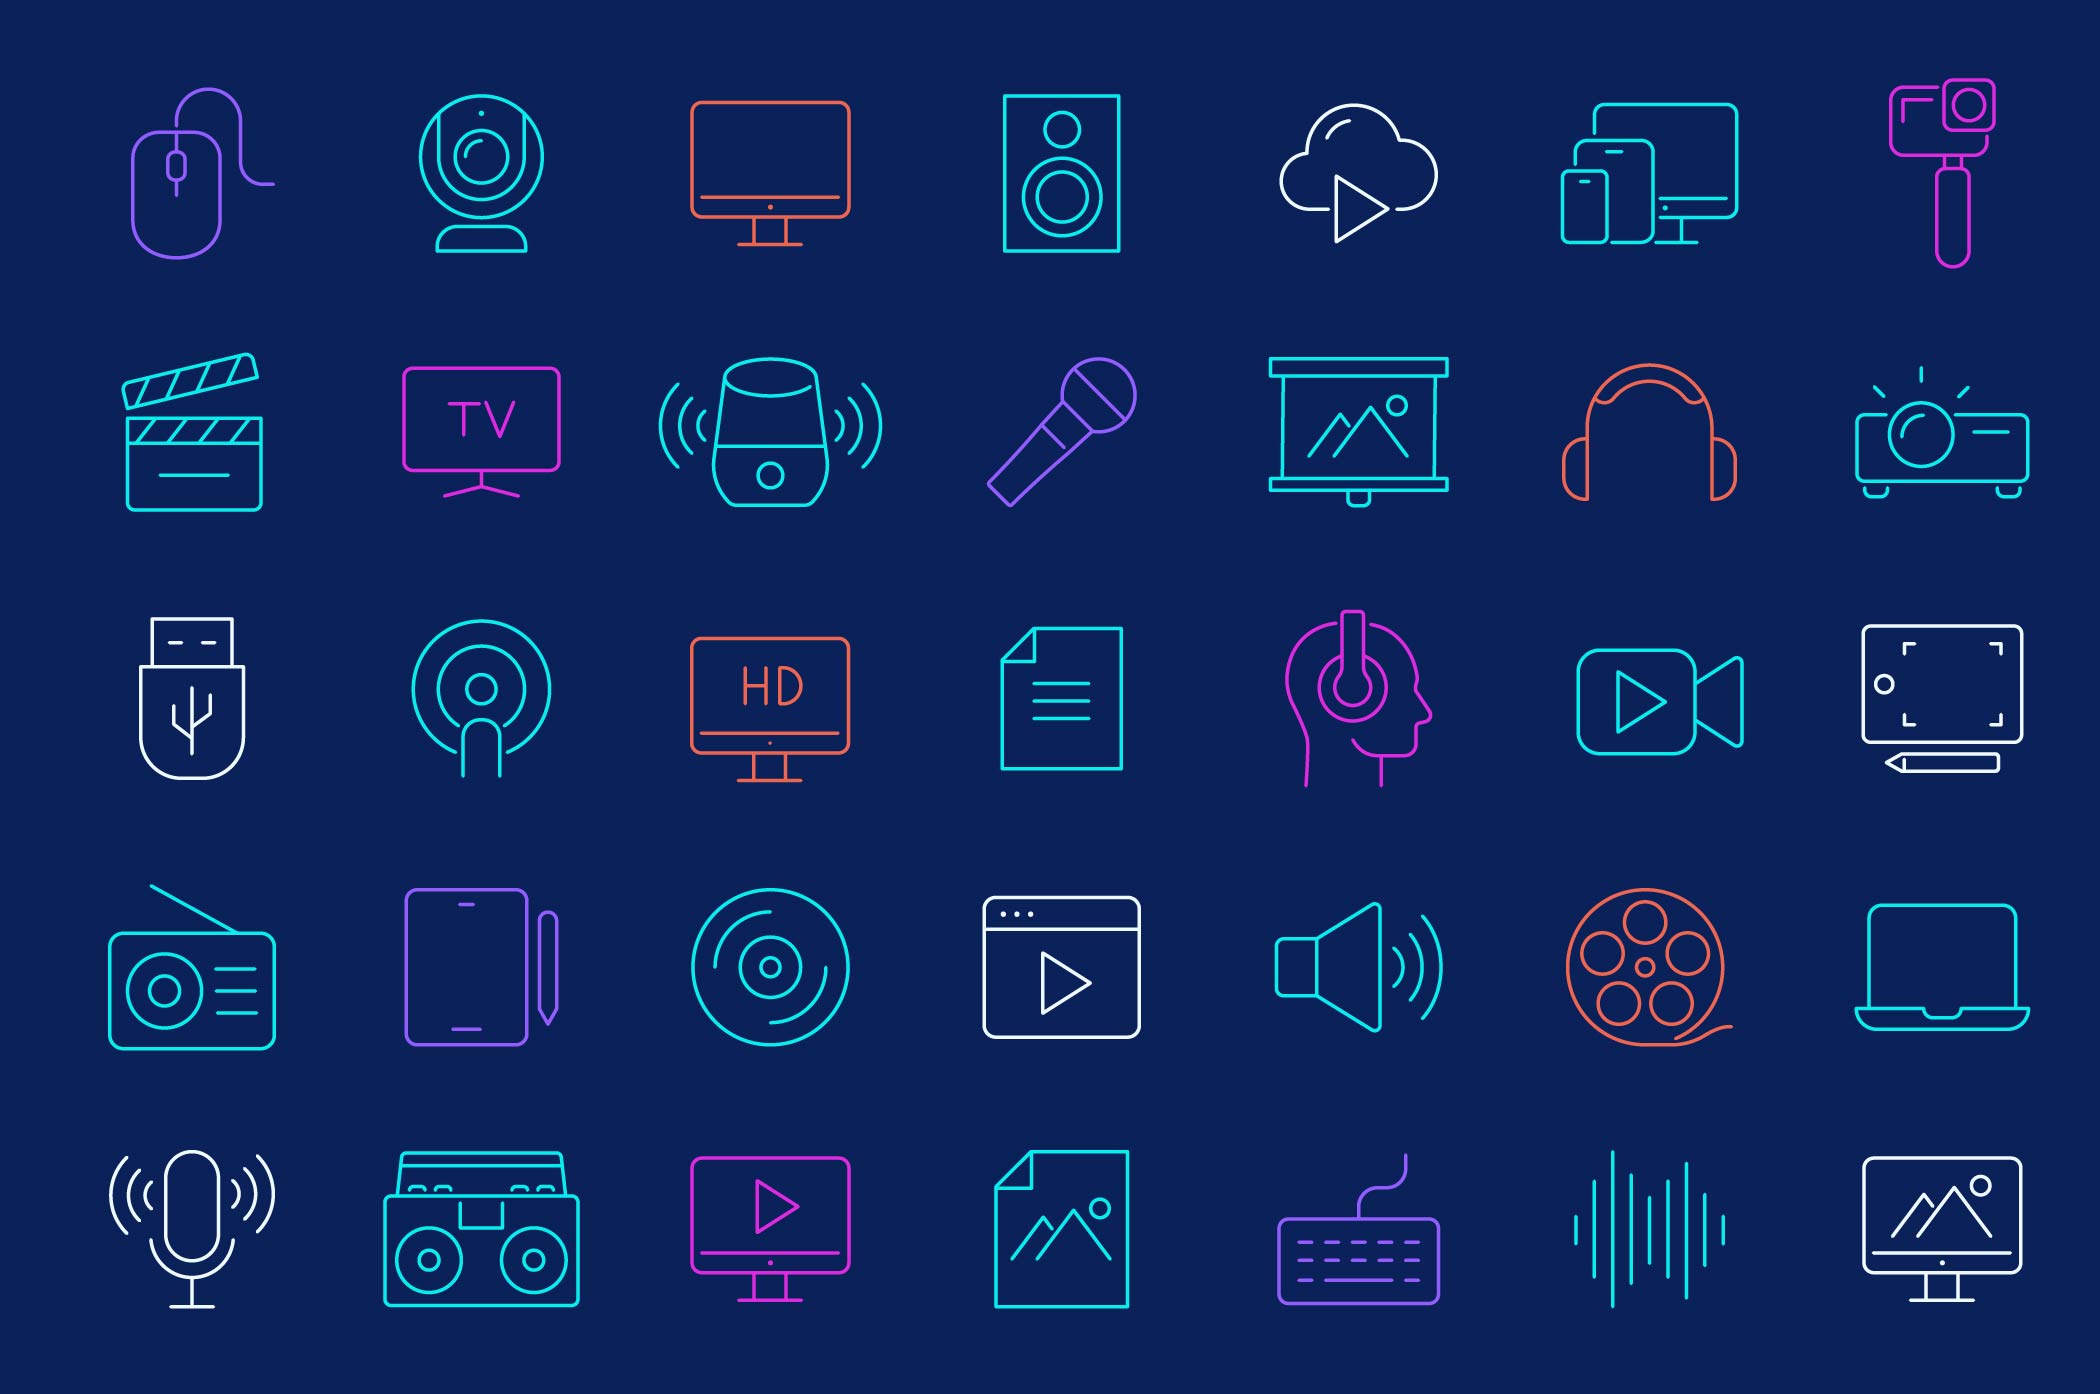 event technology icons with mics, speakers, live streaming, videos, tvs